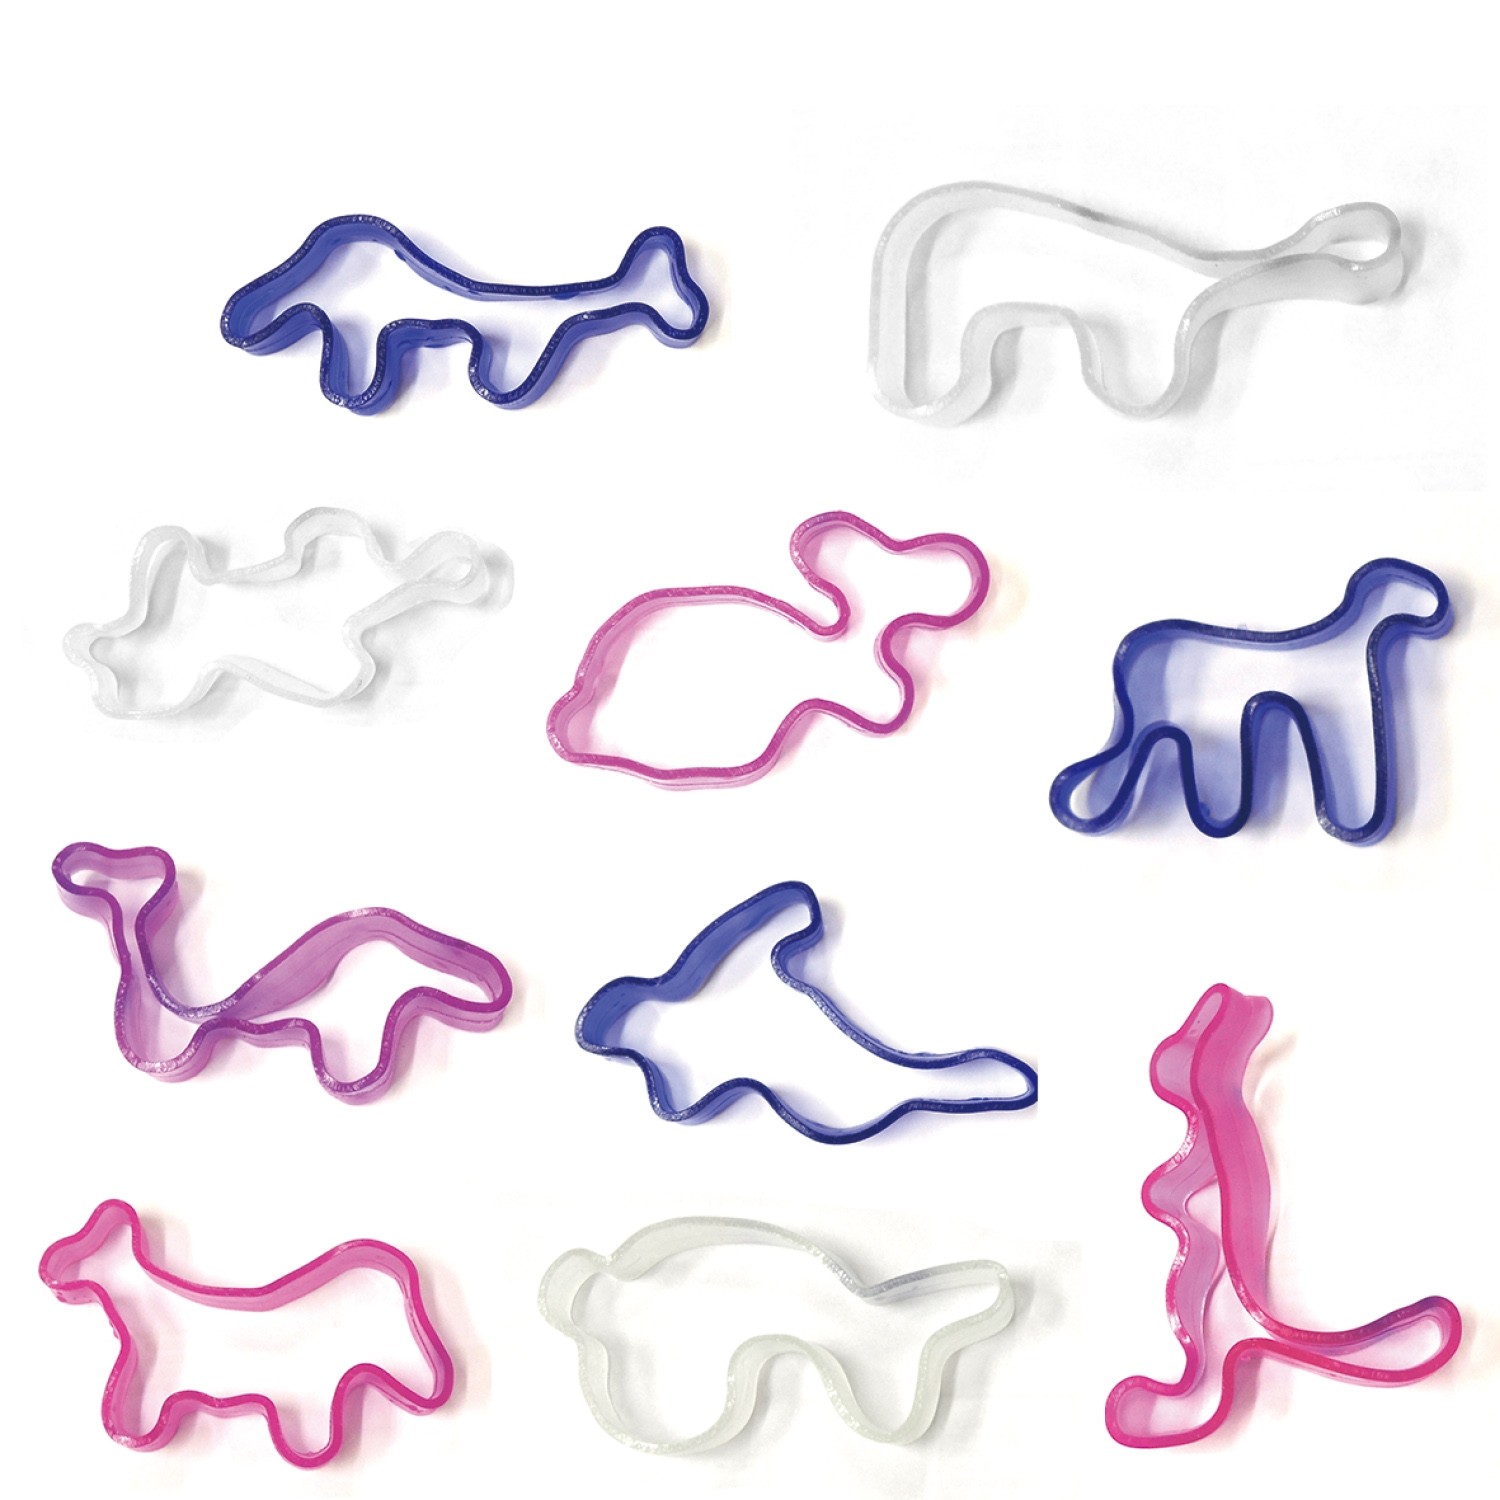 Animal Shape Rubber band - Girl's Toys - Products - Forever Shiny Limited,  specialize in small & vending toys